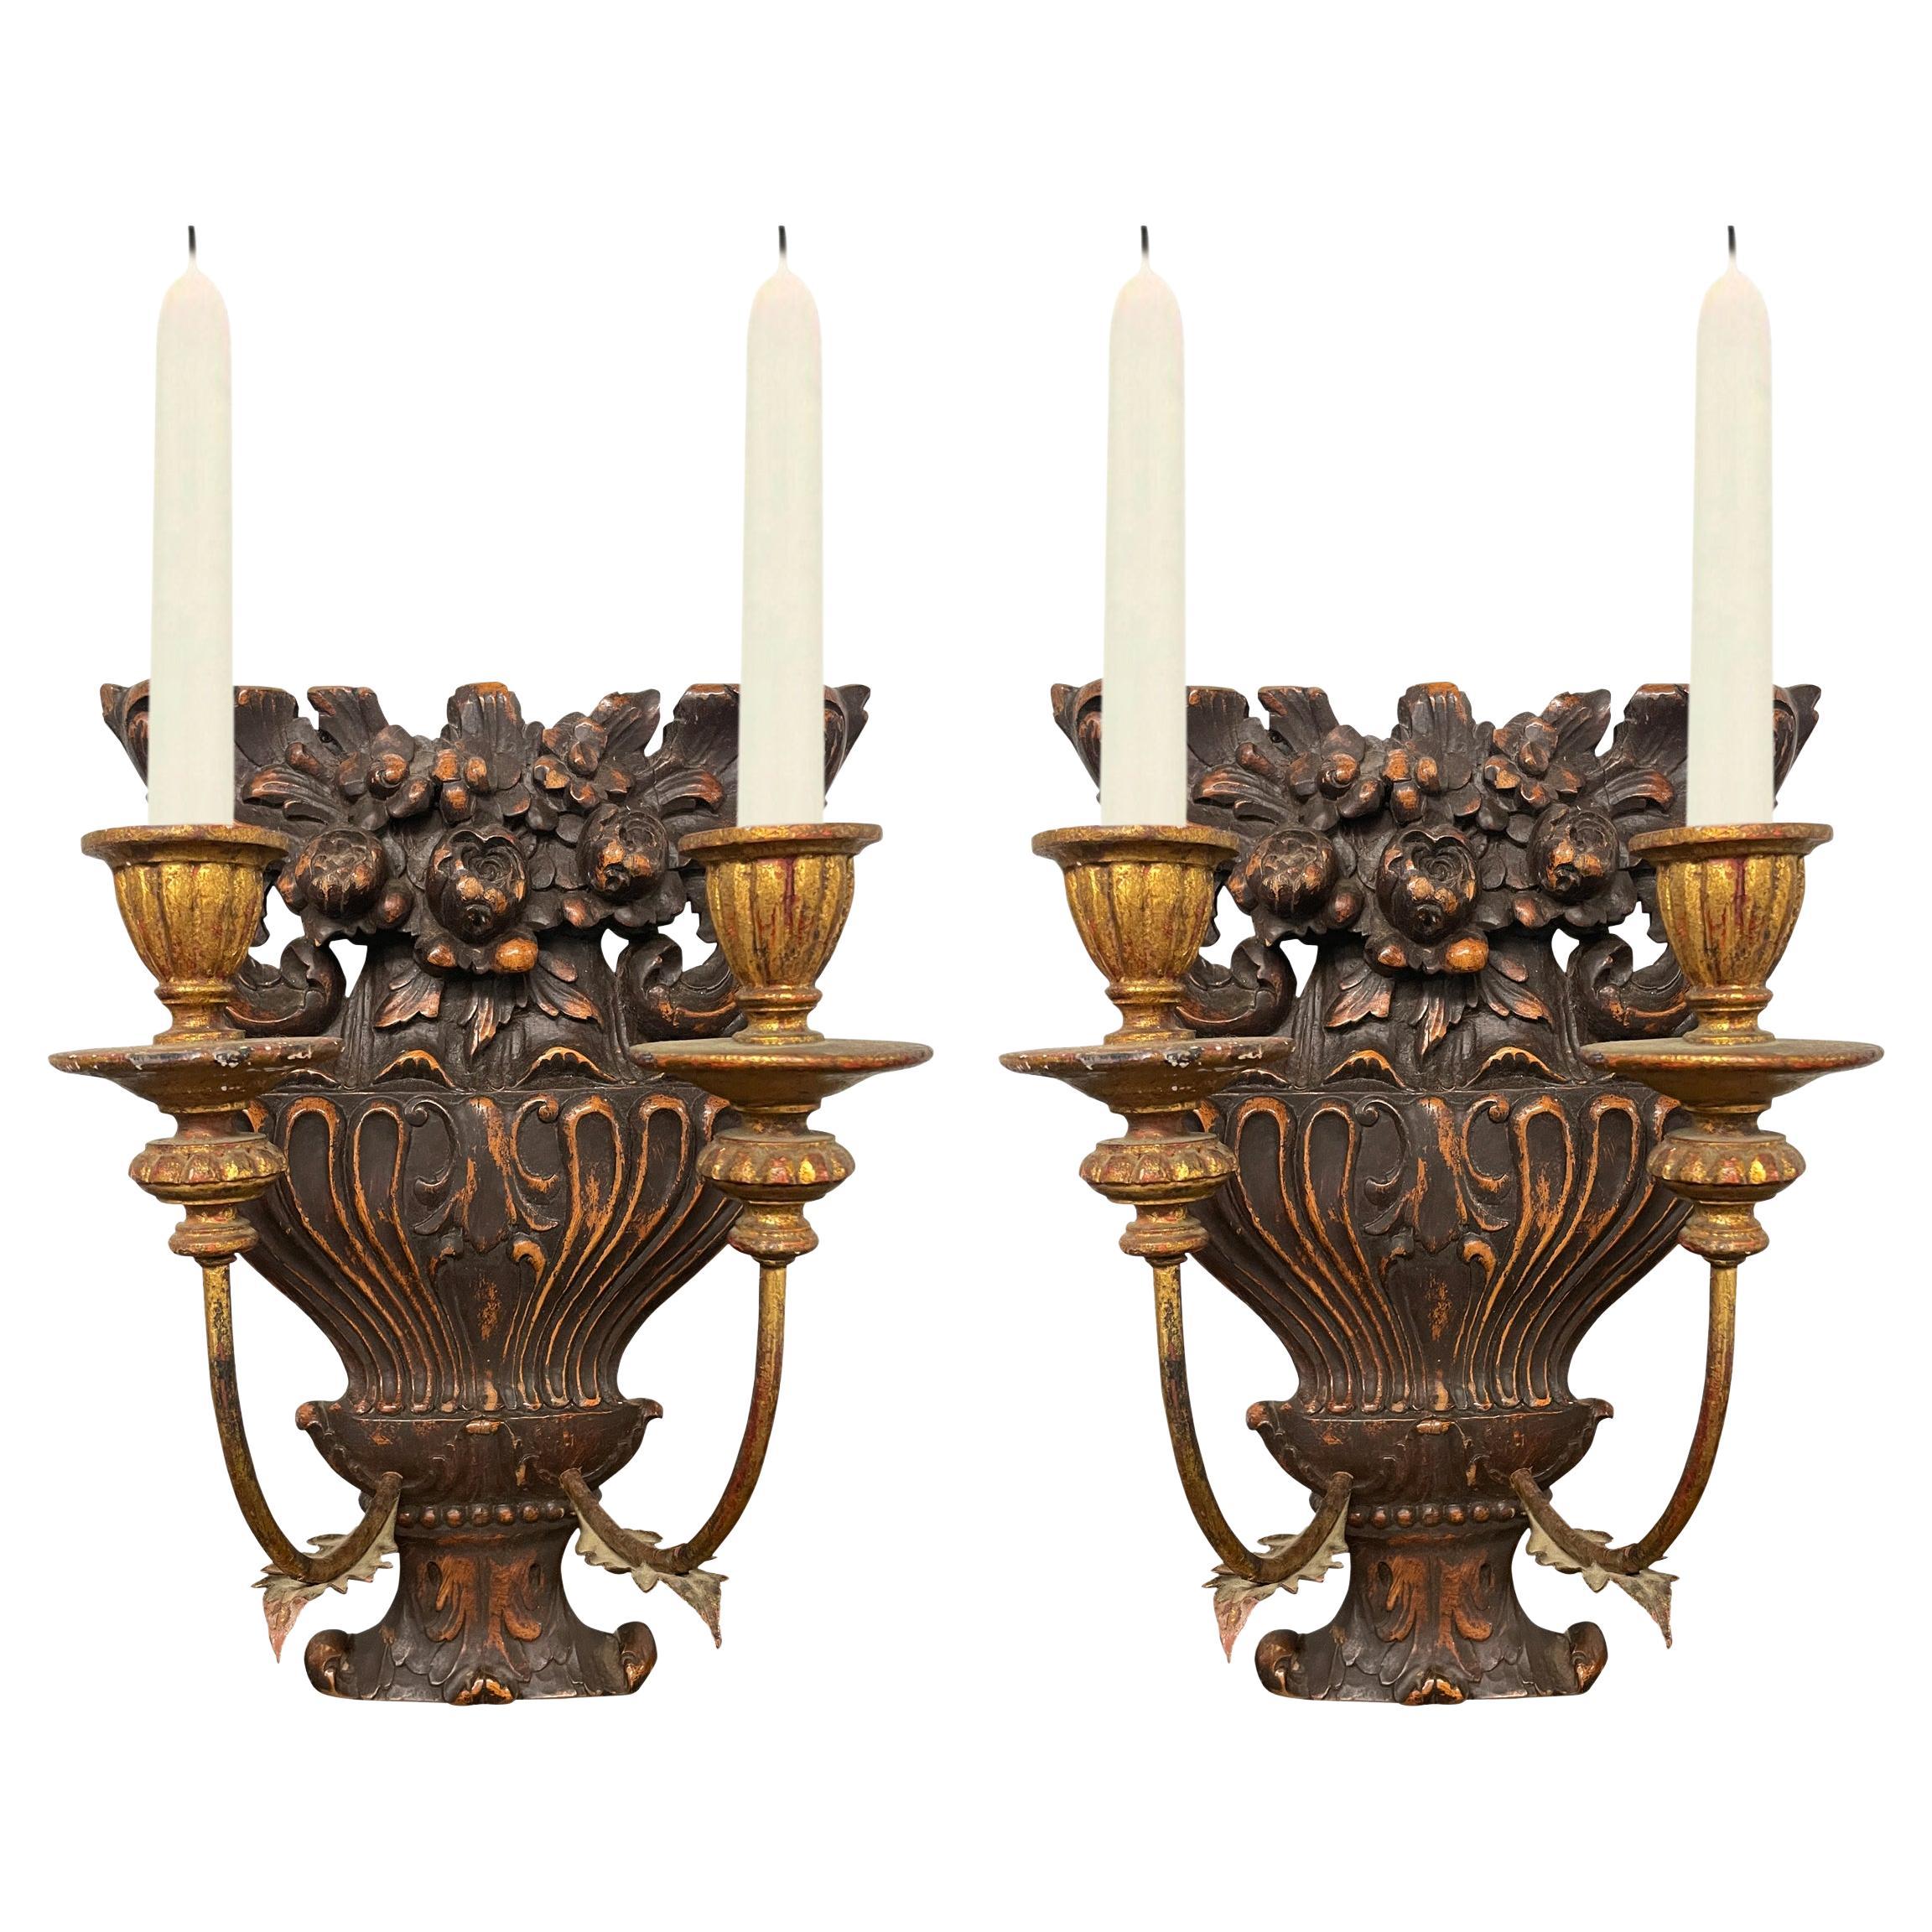 Pair of 19th Century French Carved and Gilt Wood Candle Sconces